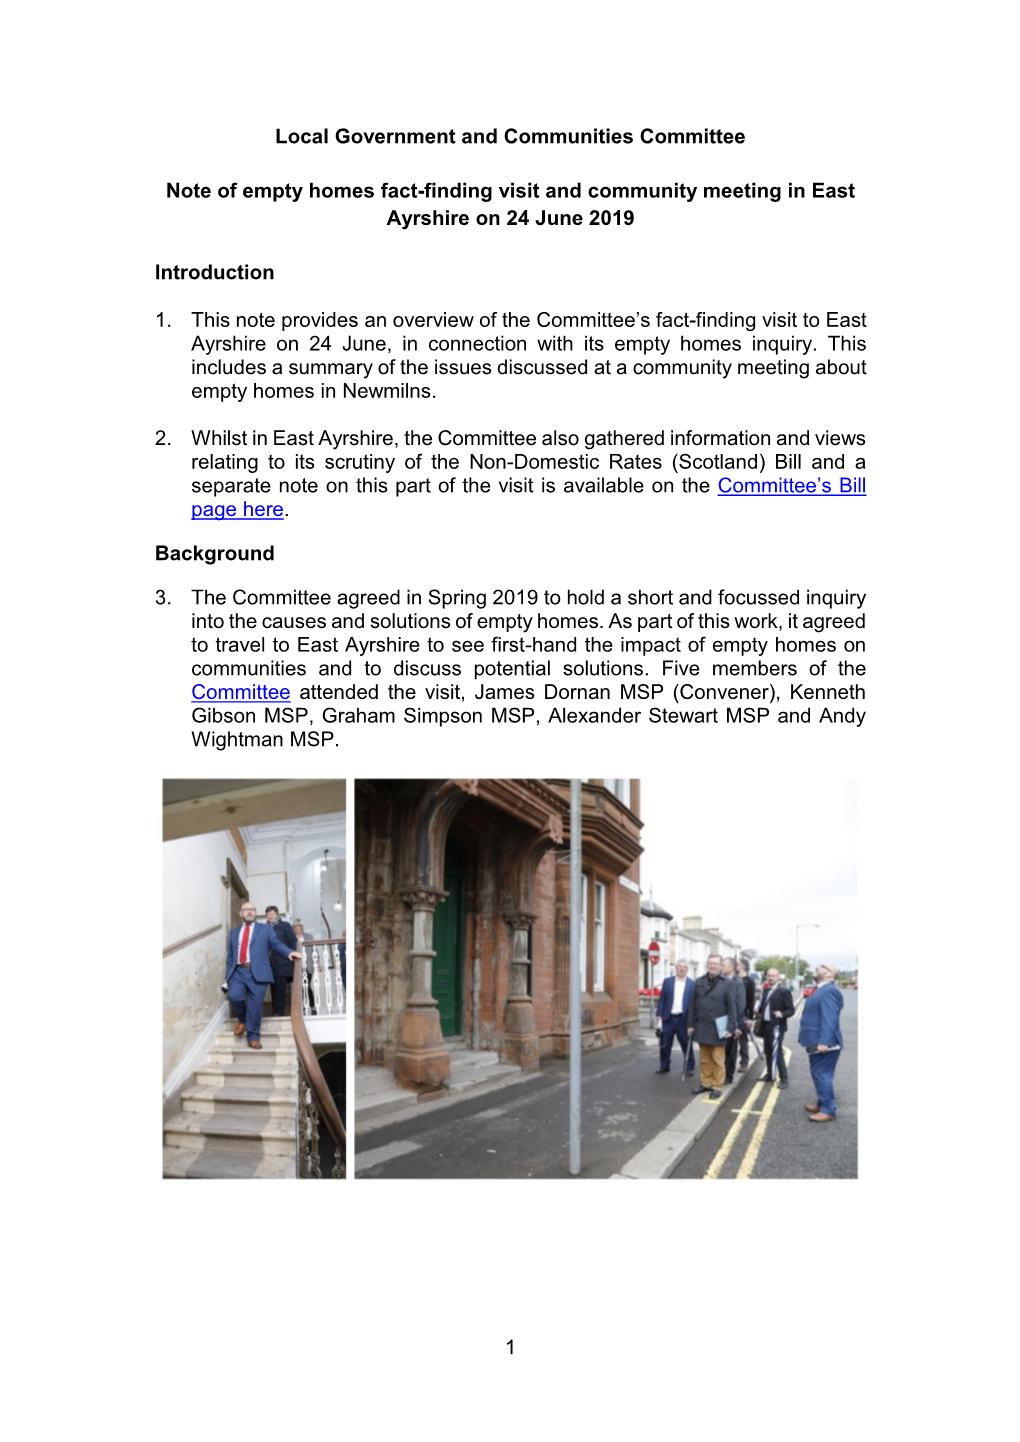 Summary Note of Visit to East Ayrshire